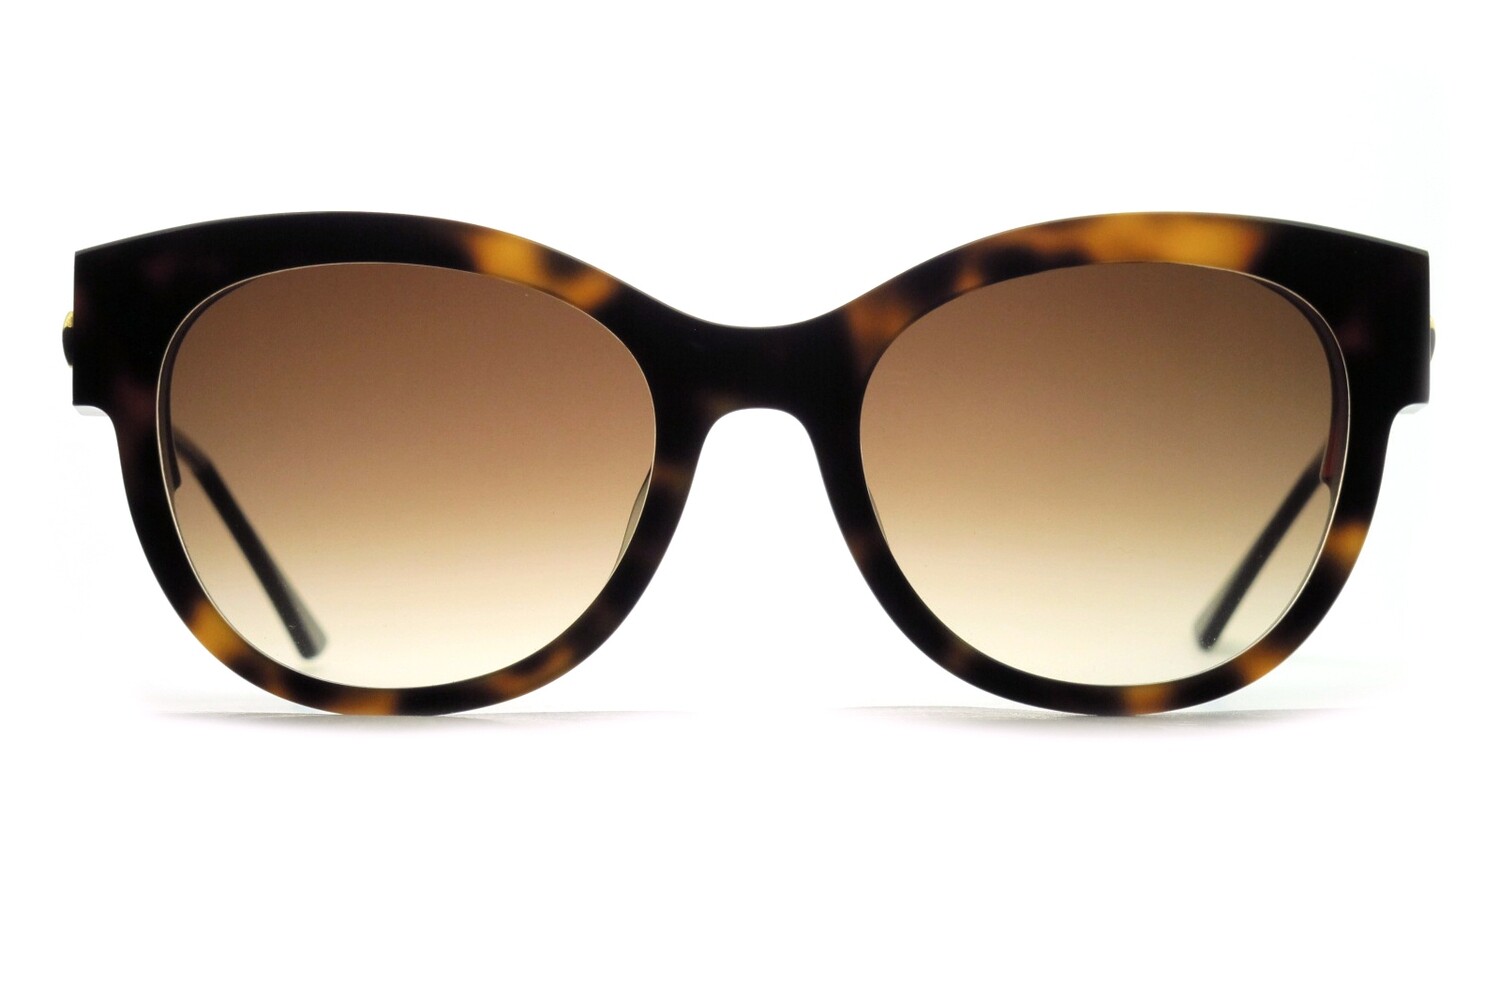 Angely by Thierry Lasry